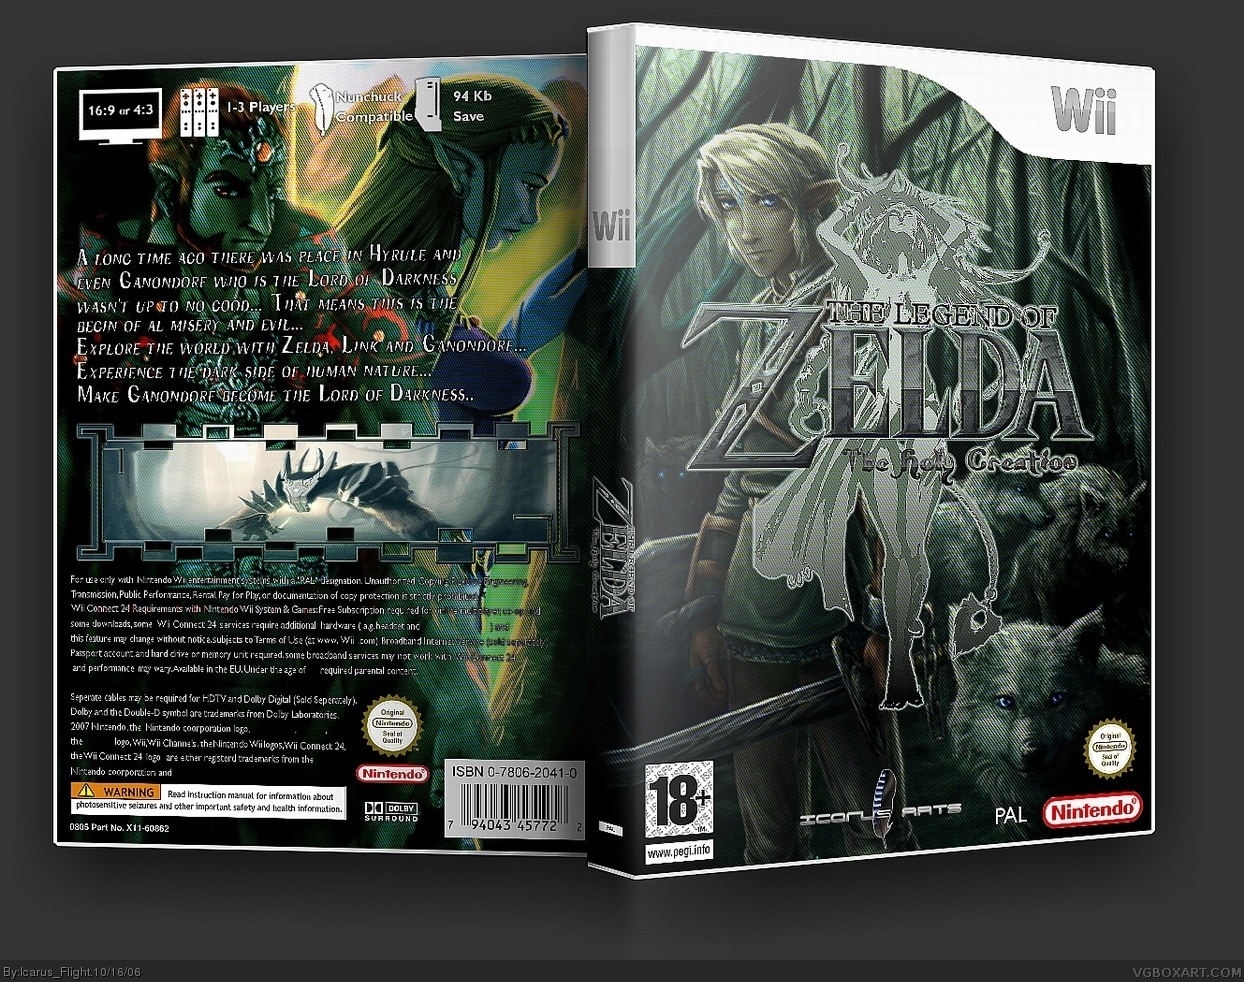 The Legend of Zelda: The Holy Creation (Game) box cover